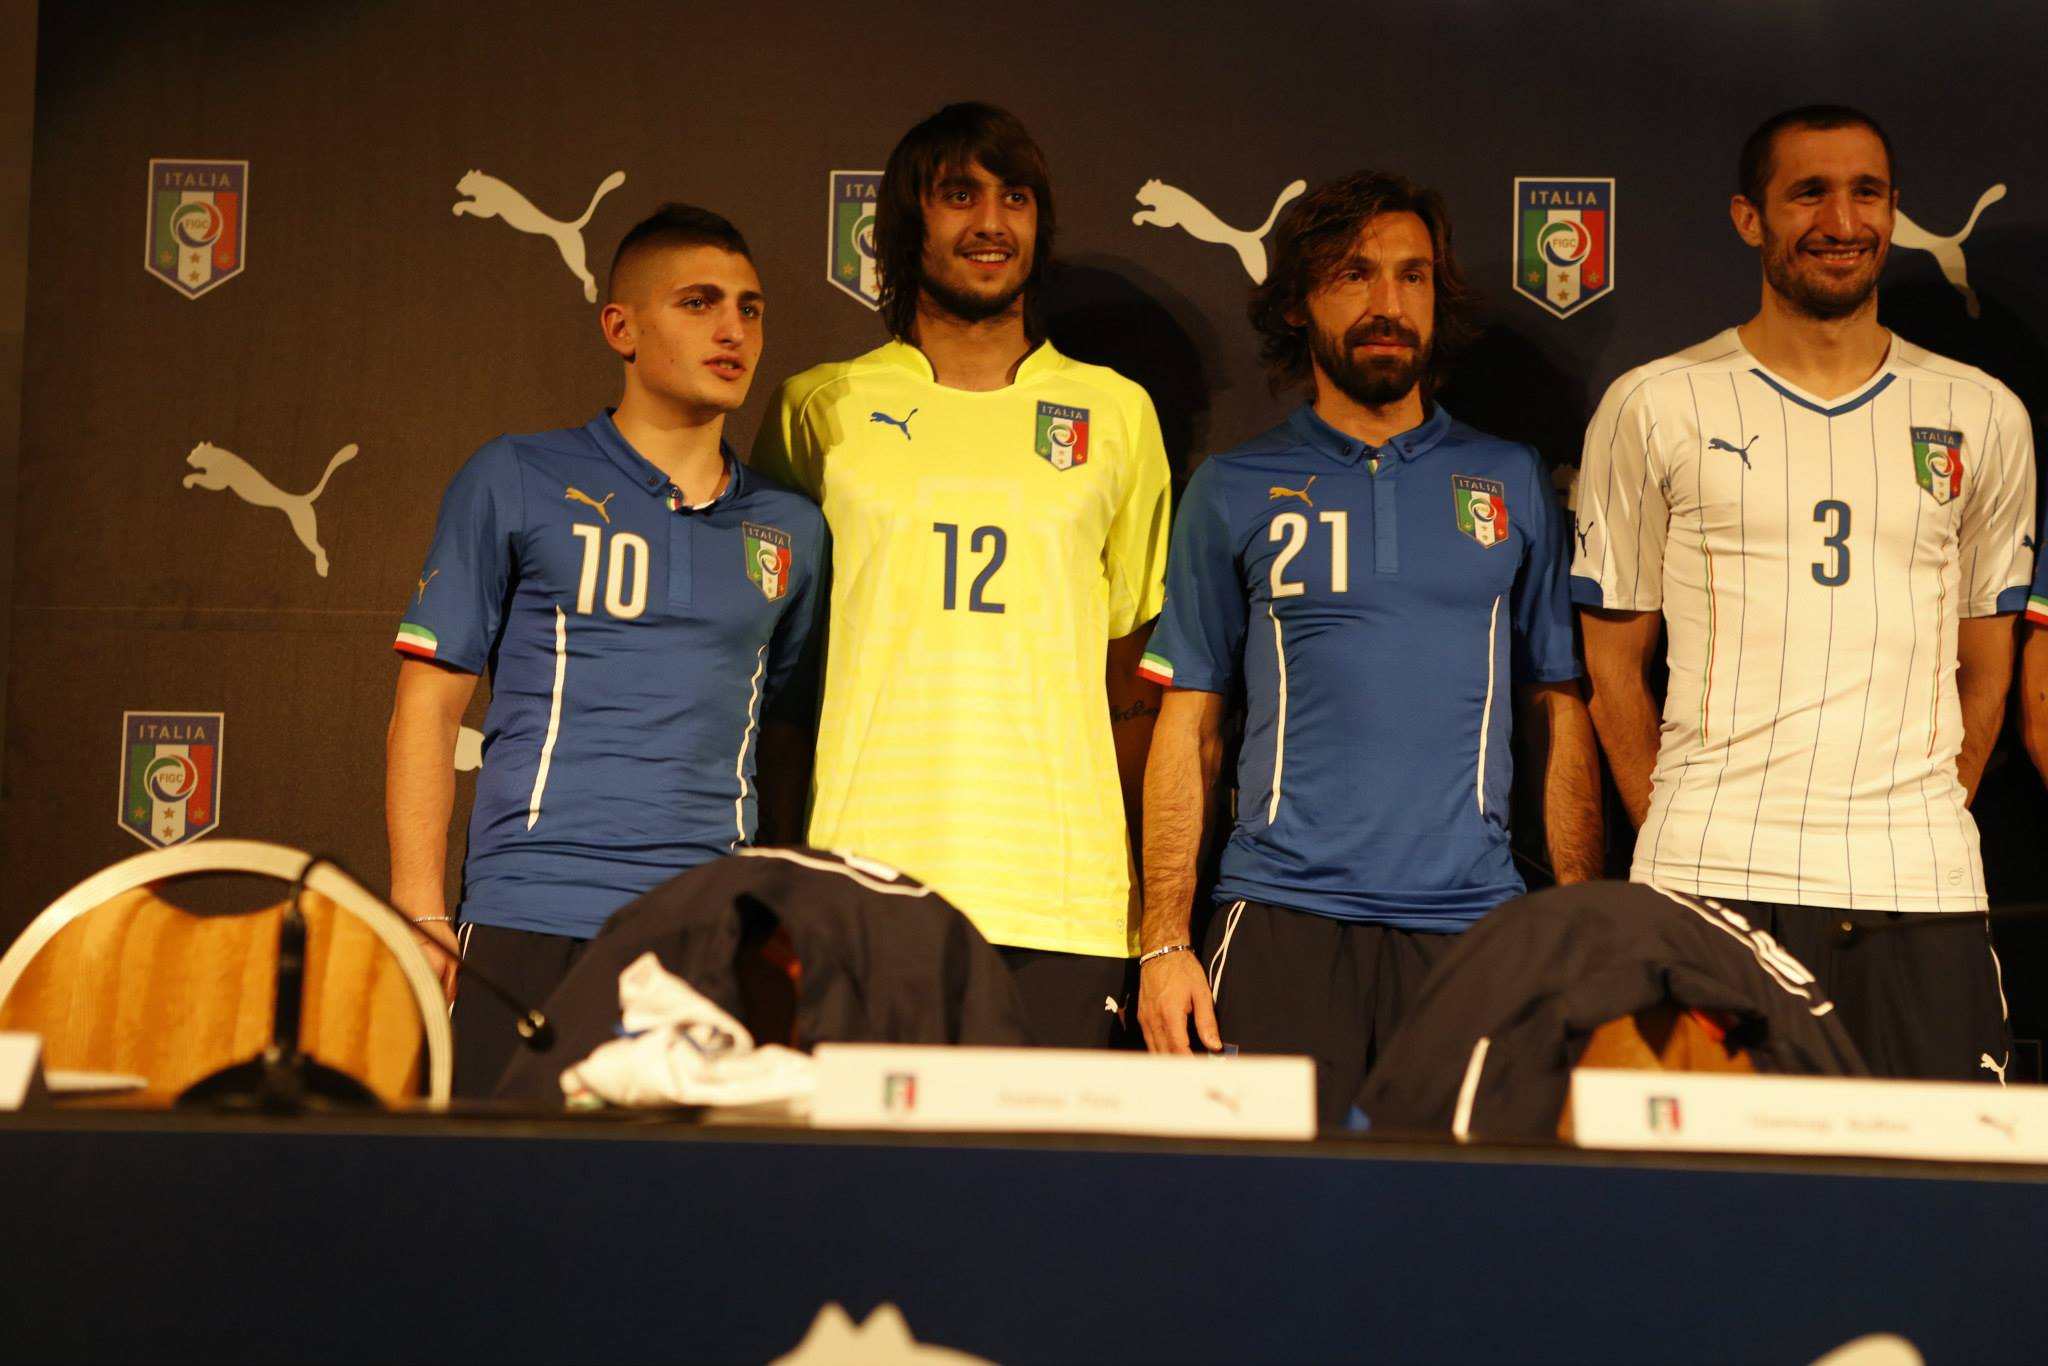 Photos of Italy in the World Cup